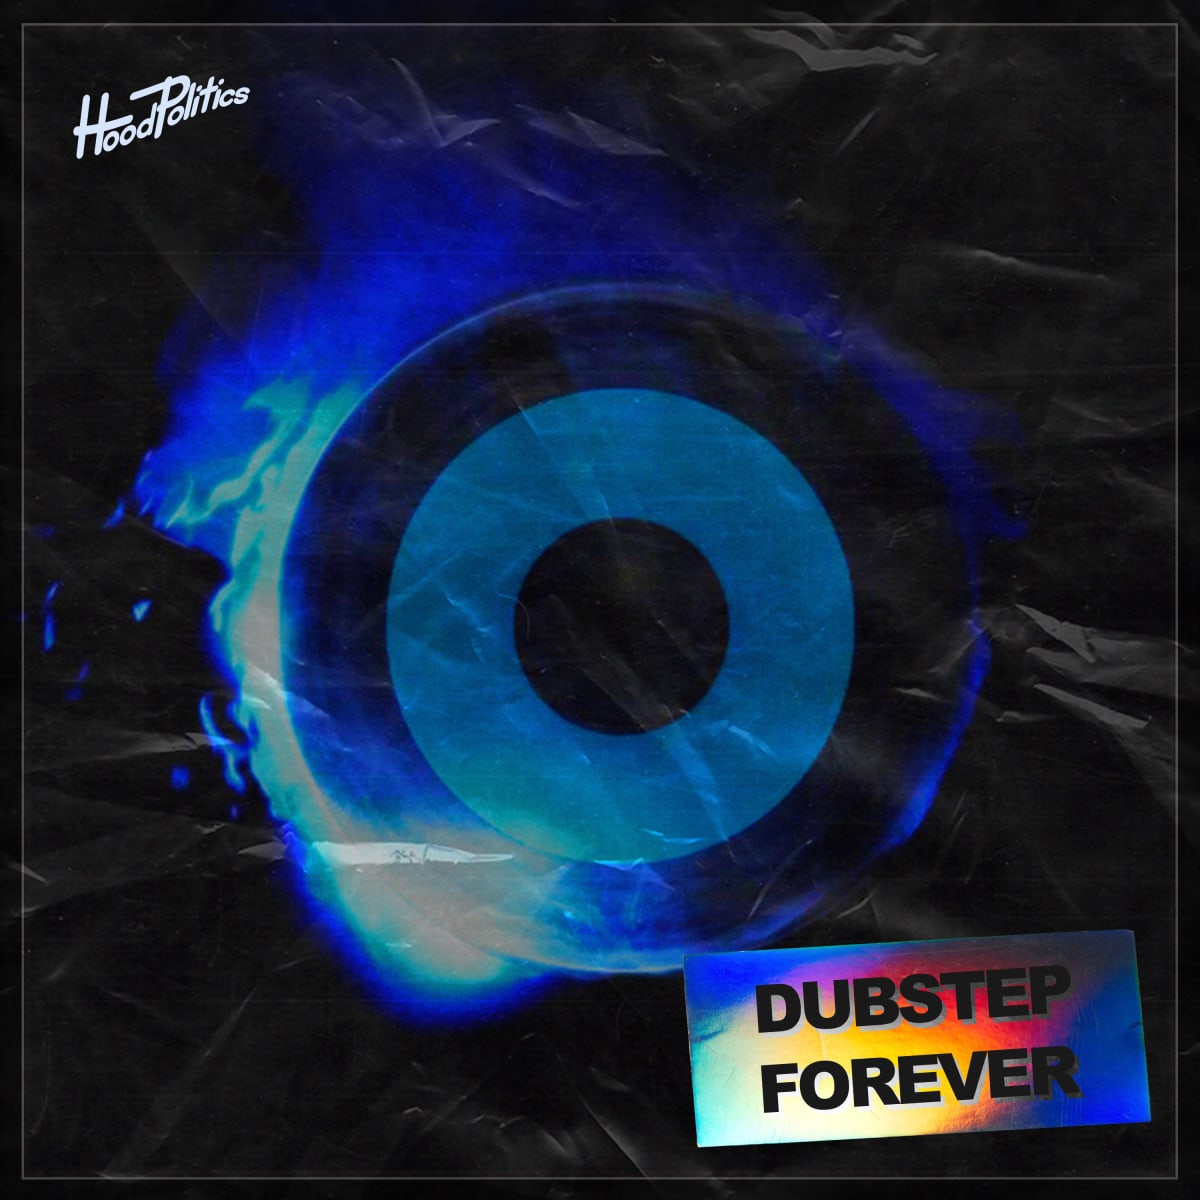 Hood Politics Records Boldly Reinvents Iconic Bass Tracks for House Heads In New EP, "Dubstep Forever"